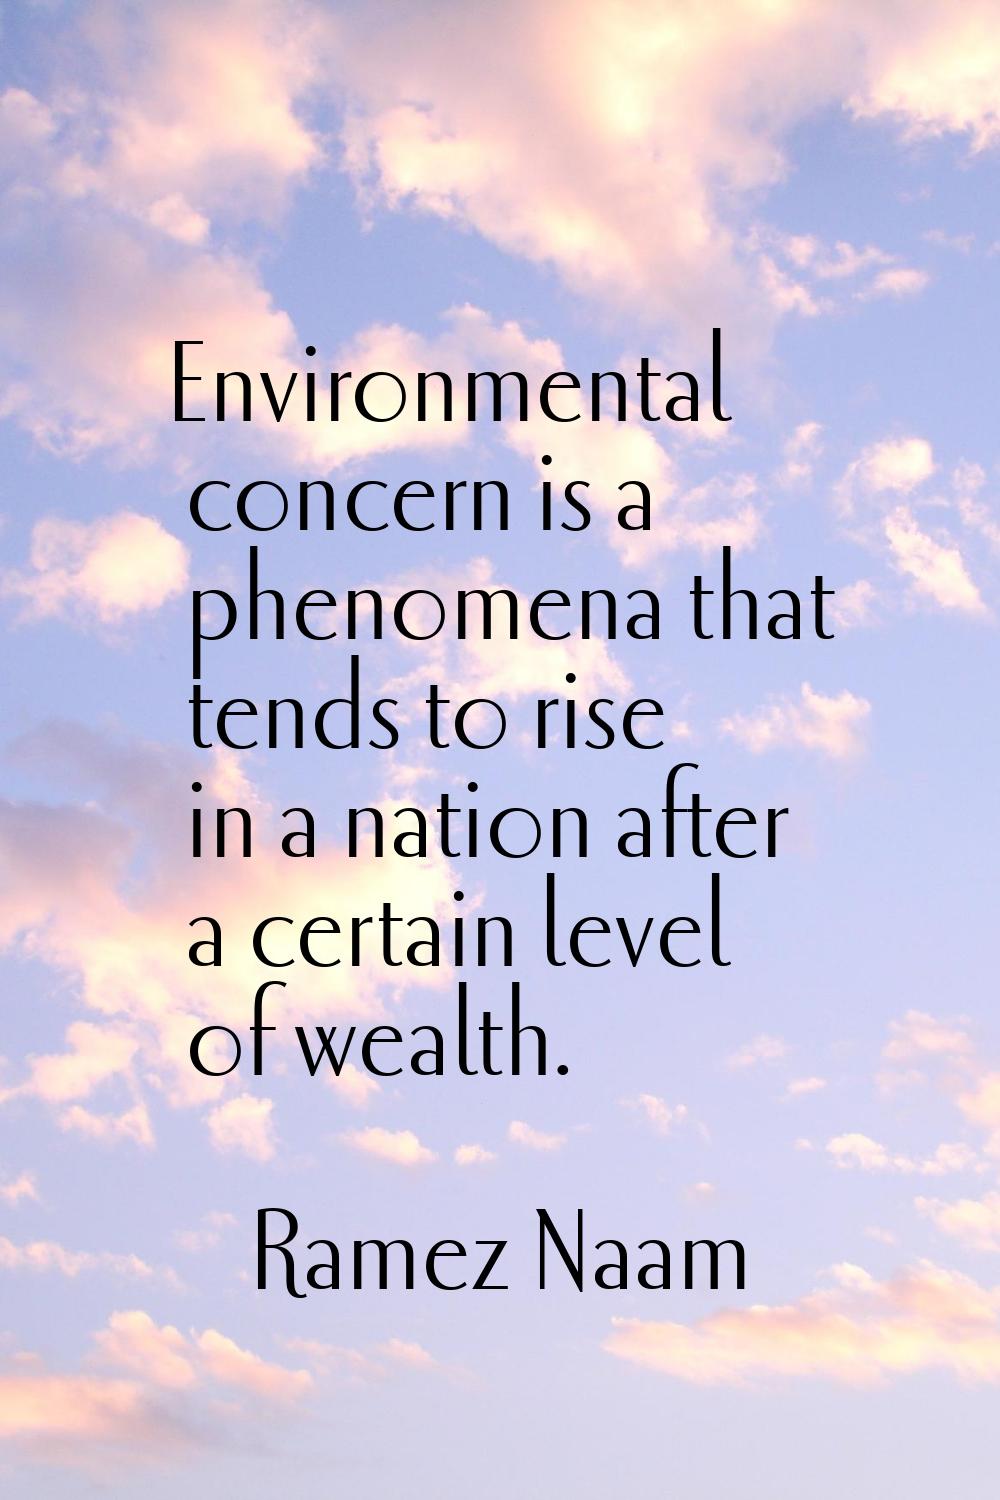 Environmental concern is a phenomena that tends to rise in a nation after a certain level of wealth